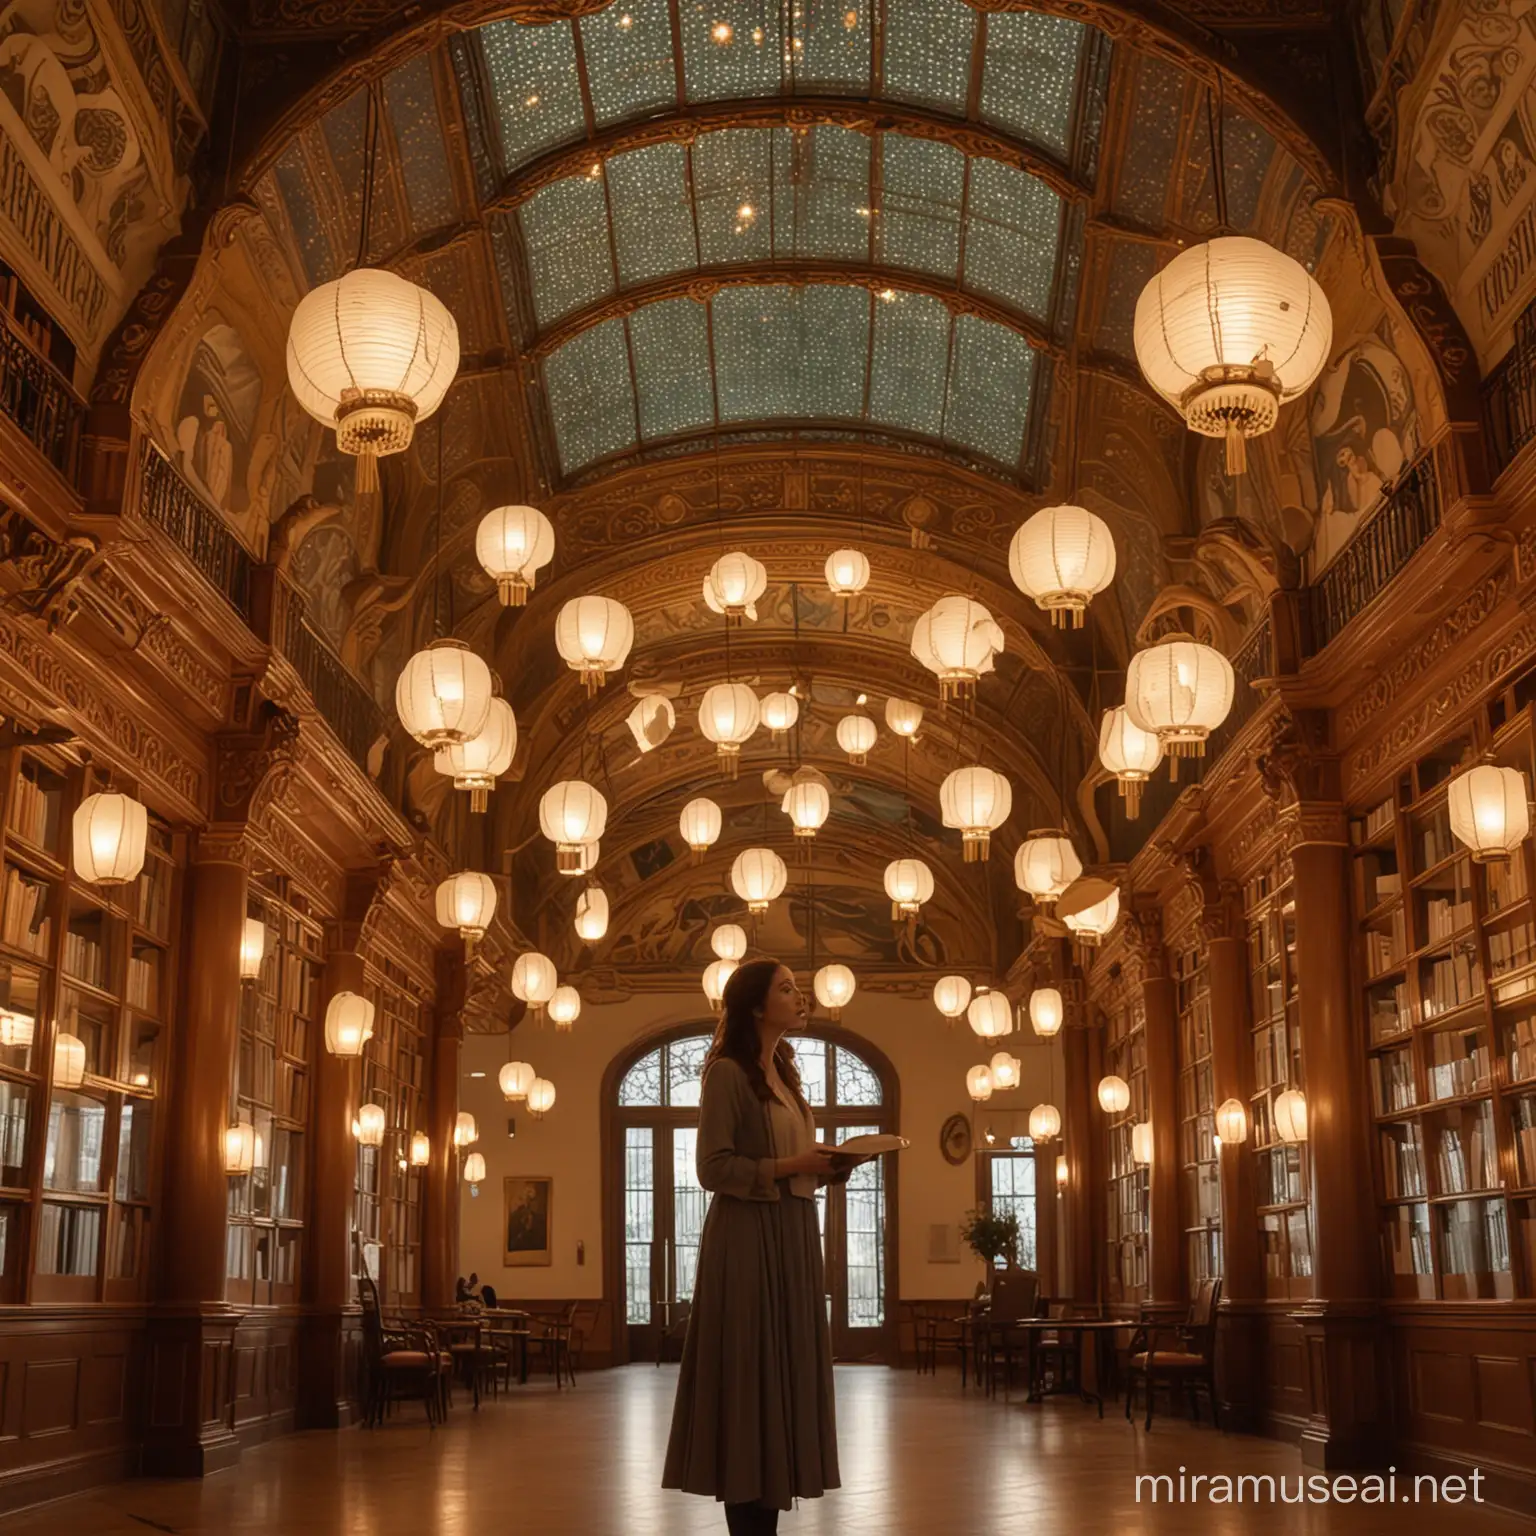 art nouveau style, grand library in background, floating lanterns, woman that has multiple faces and multiple arms, writing and reading